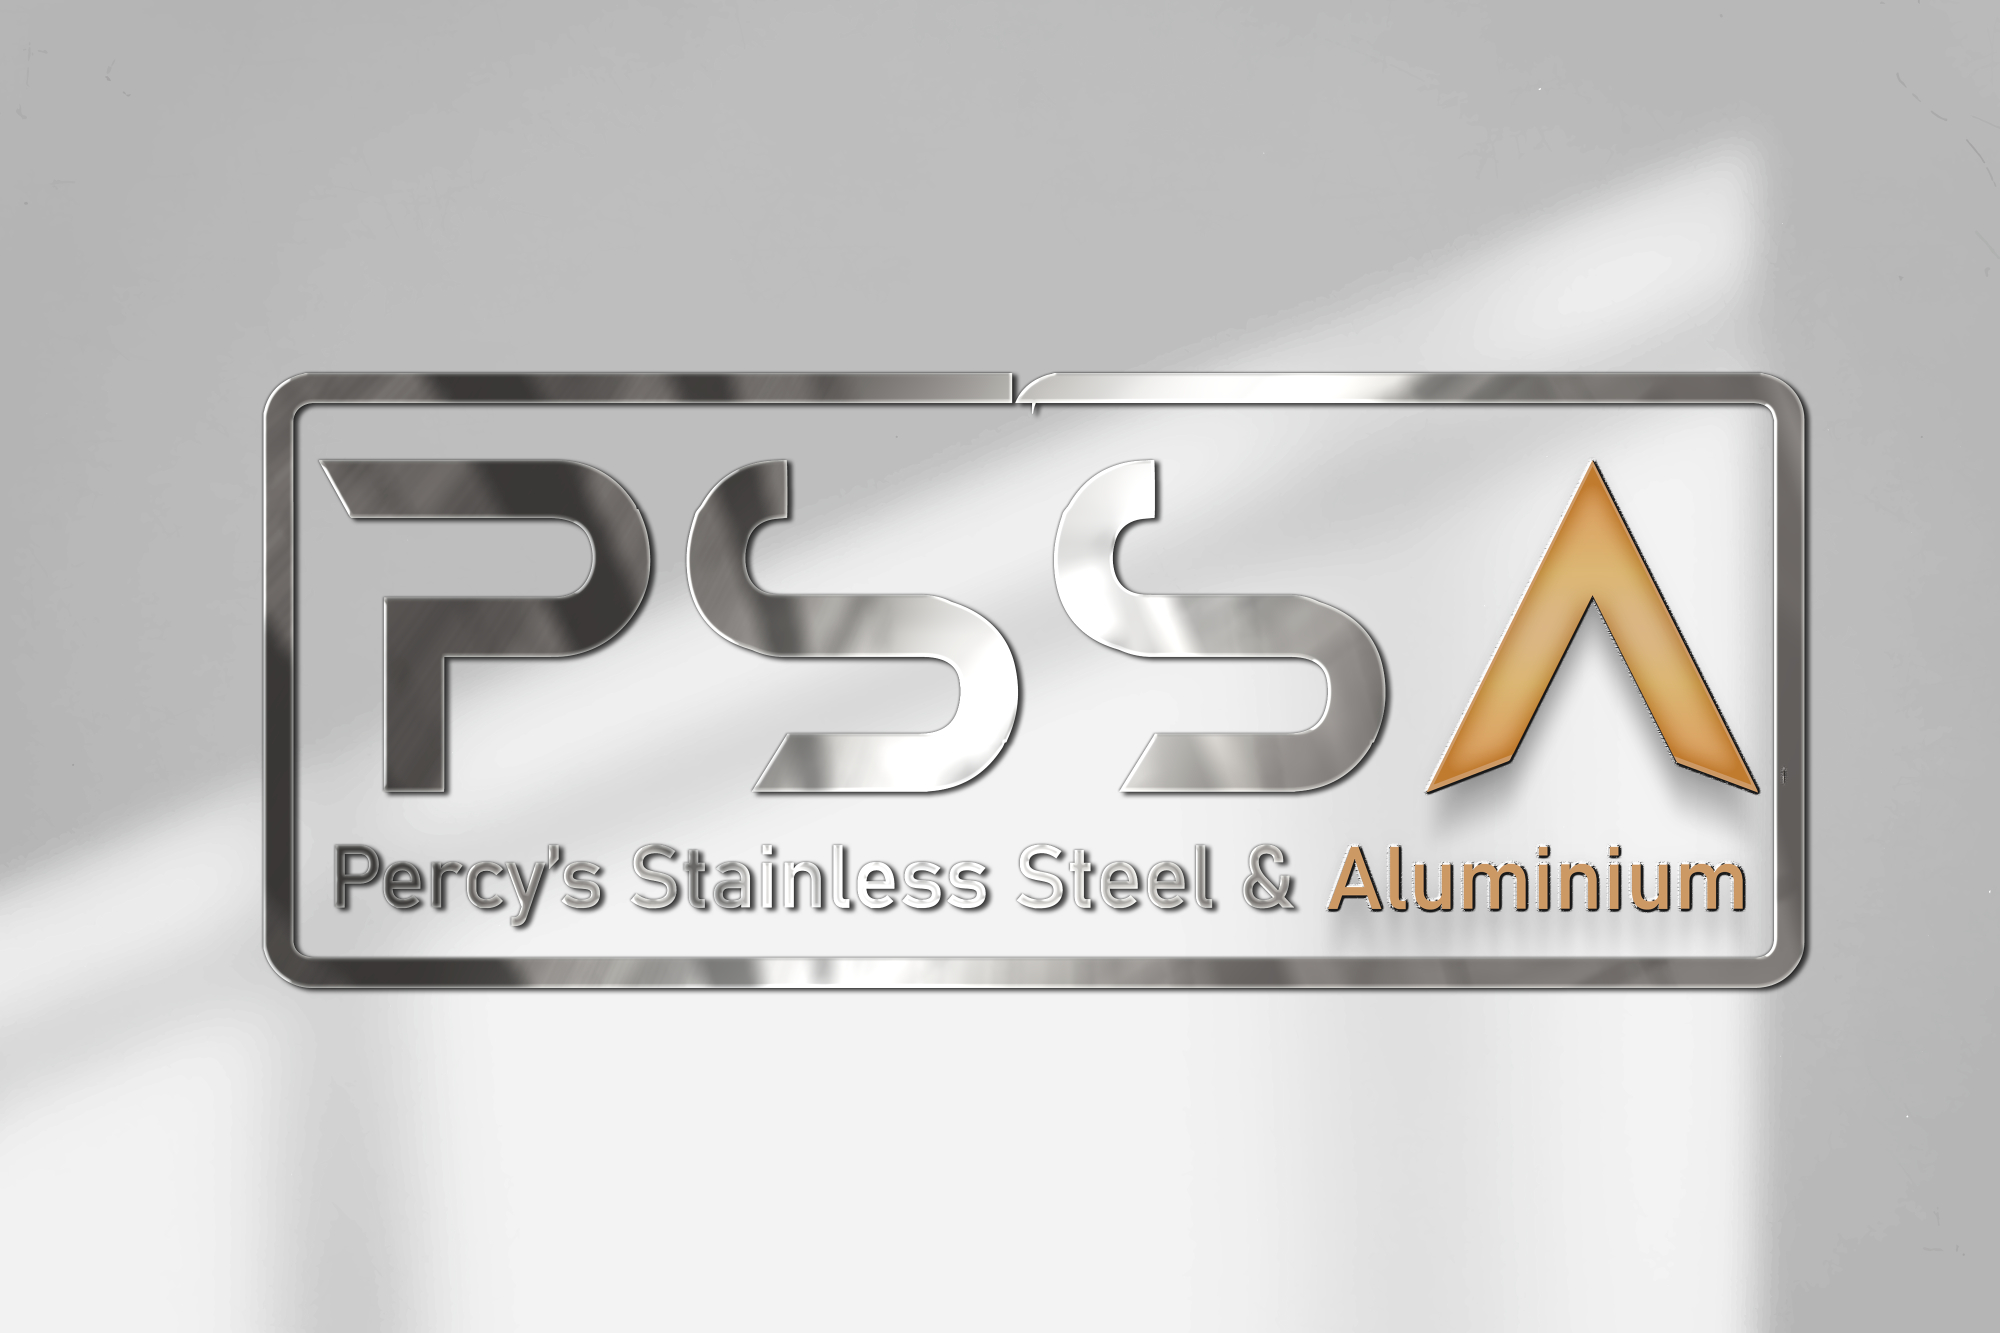 Percy's Stainless steel and Aluminium